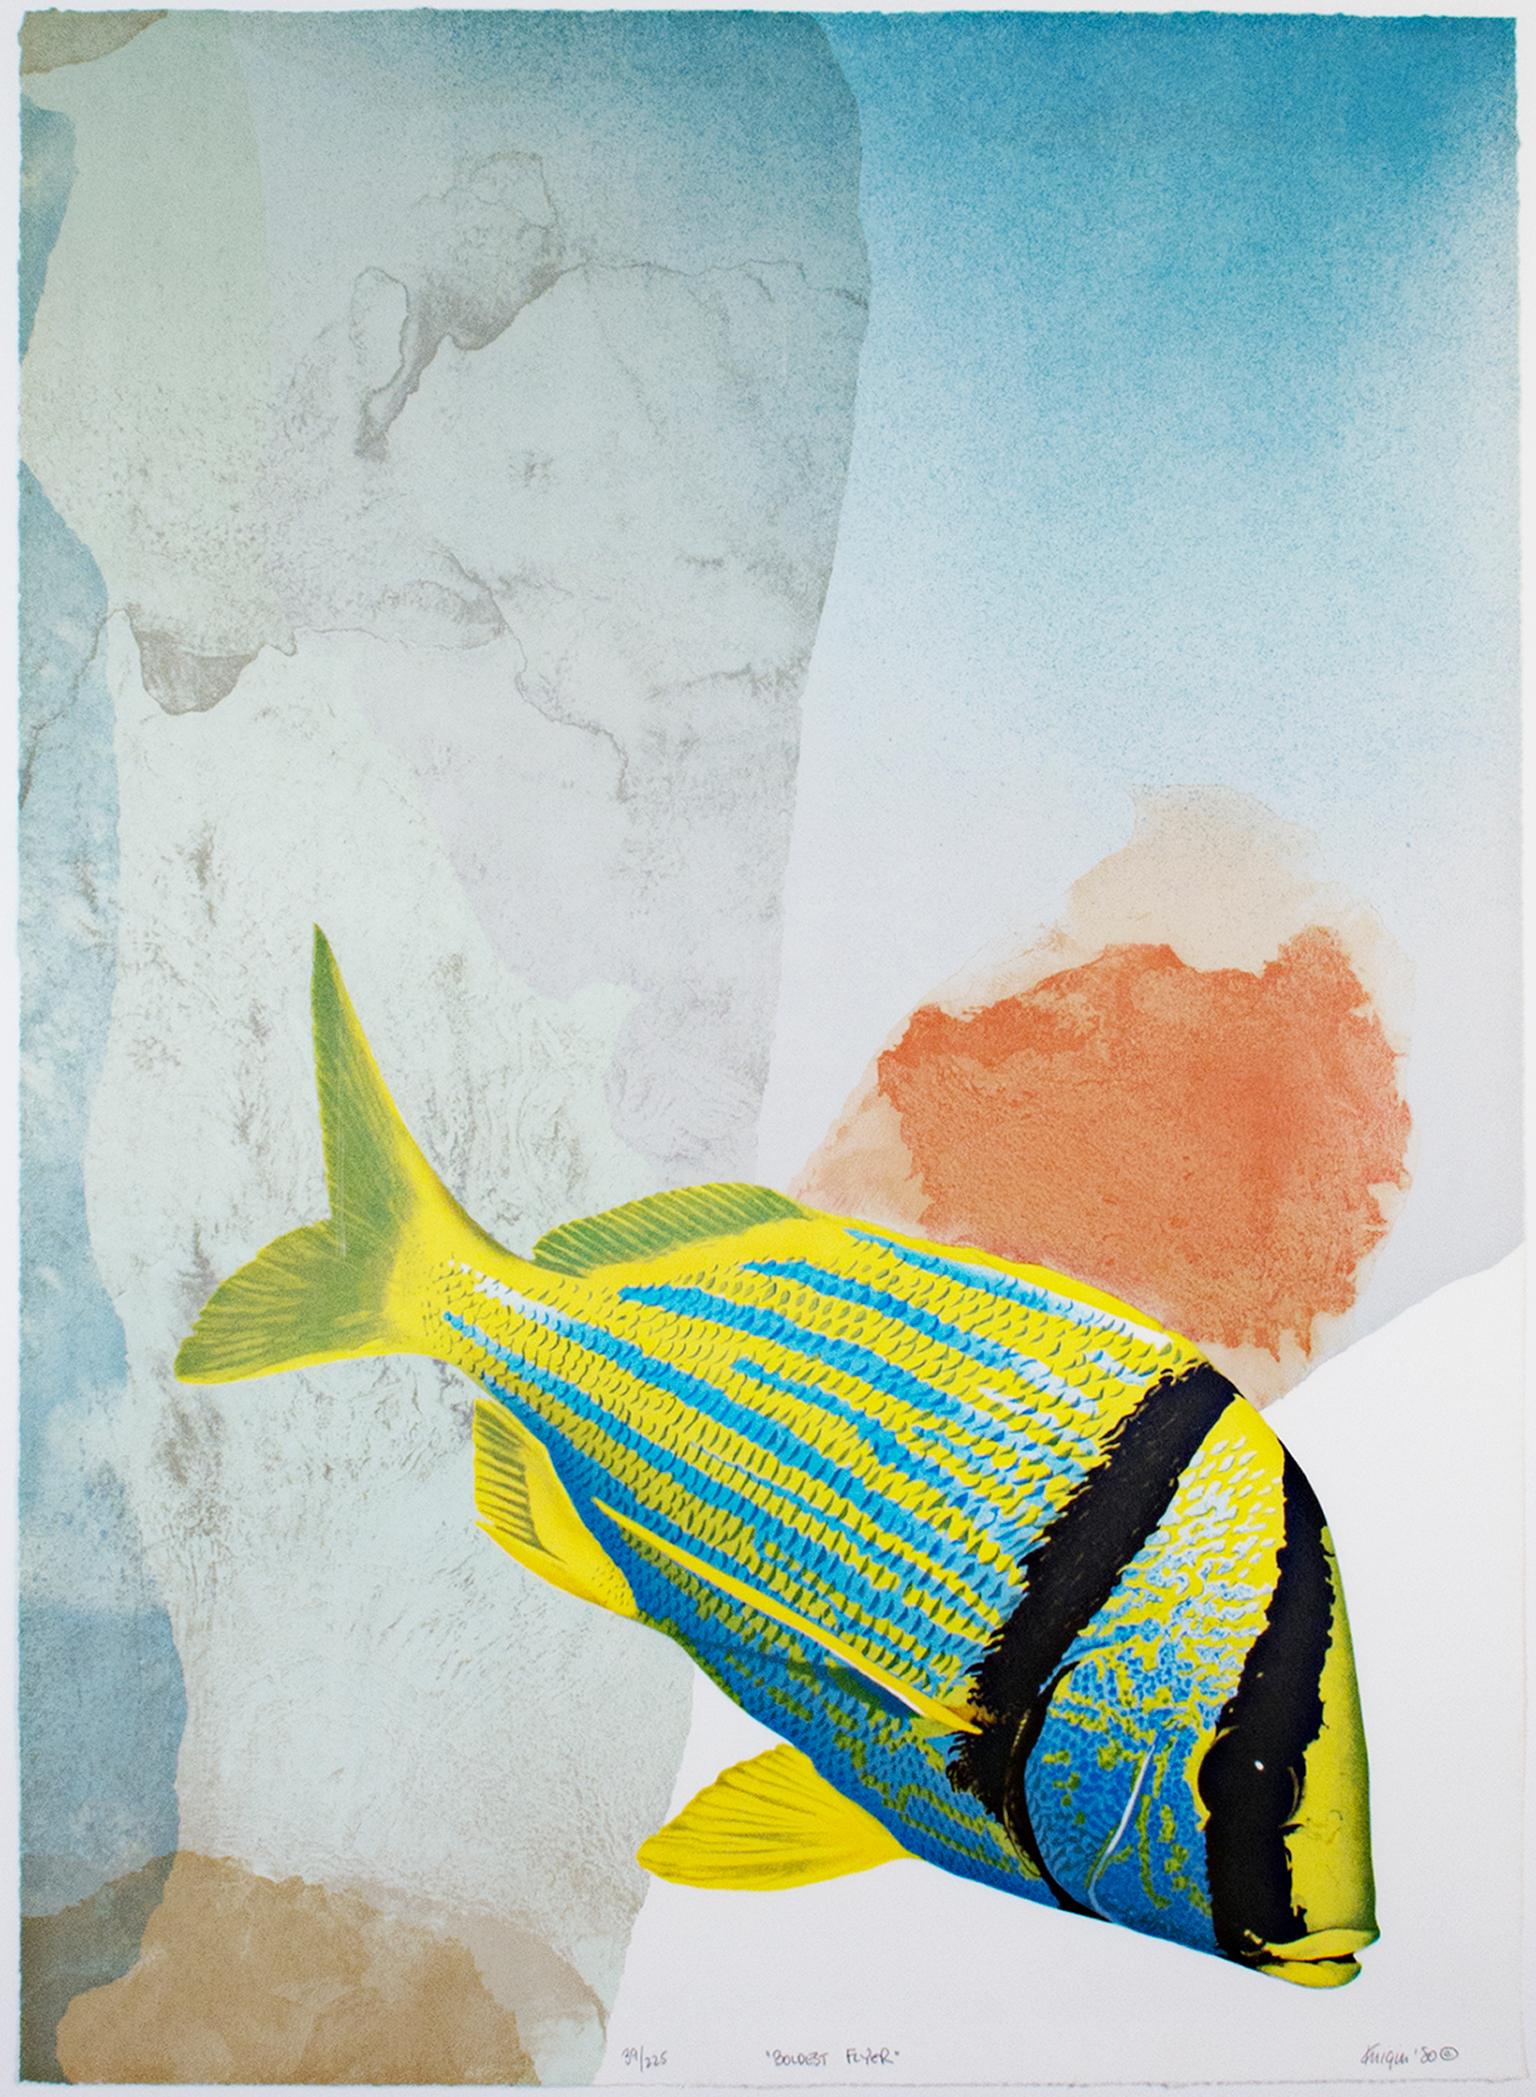 "Boldest Flyer" is an original color lithograph by Michael Knigin. The artist signed the piece lower right and titled it lower center. This piece features a bright blue and yellow fish in front of an abstract background. This piece is edition